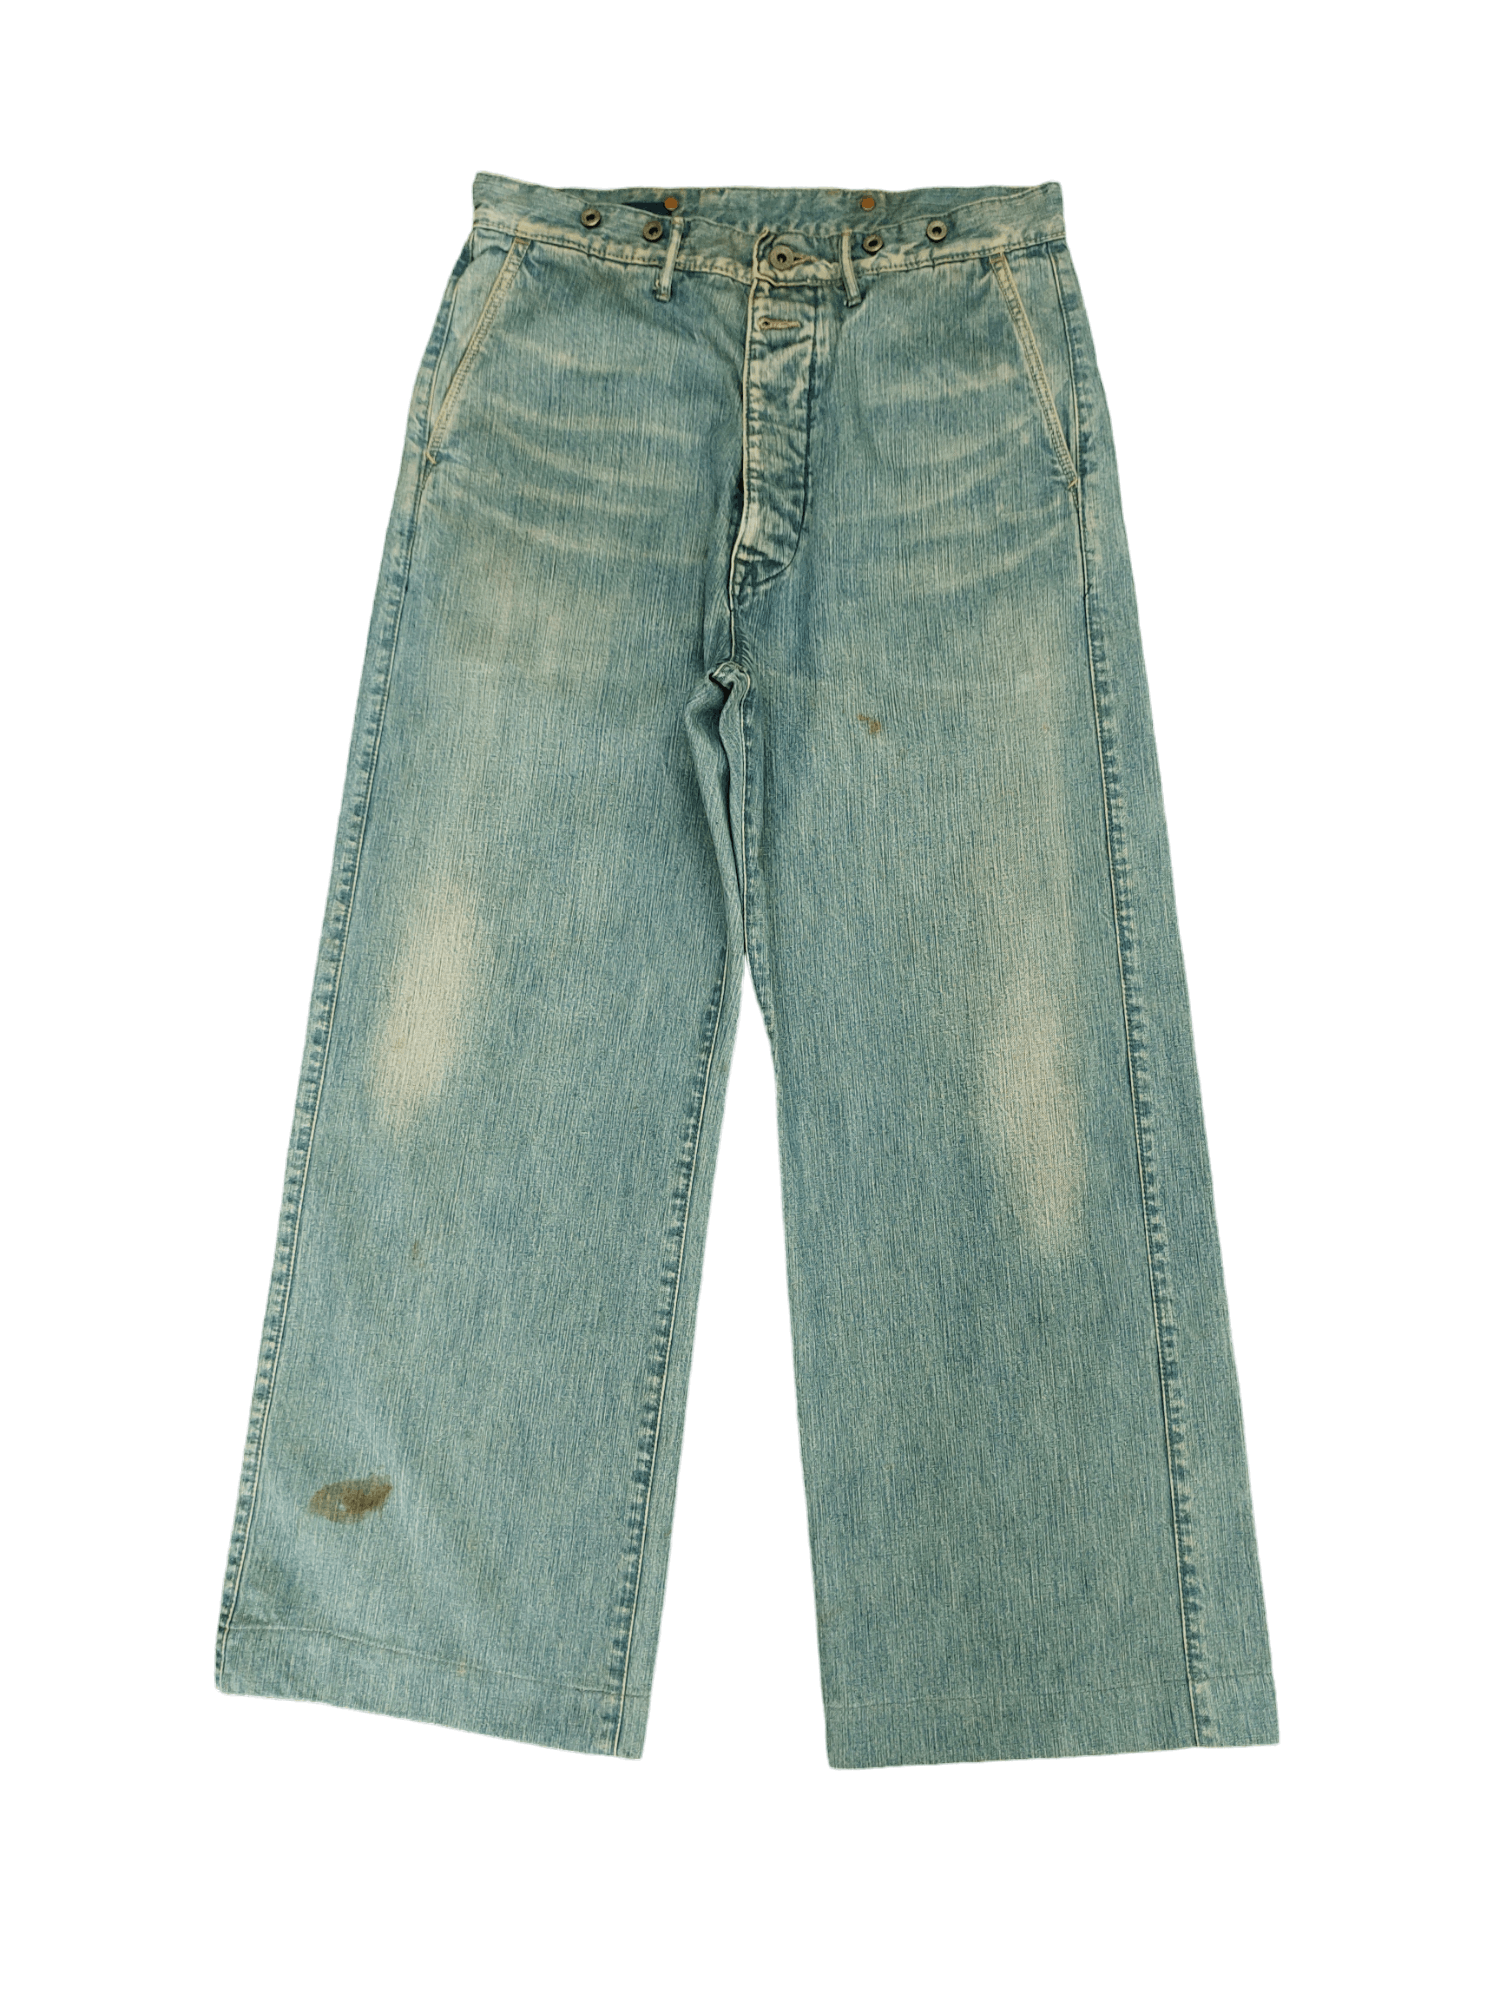 Pre-owned Kapital Hand Made By Zipang Island Rusty Wide Loose Denim In Multicolor